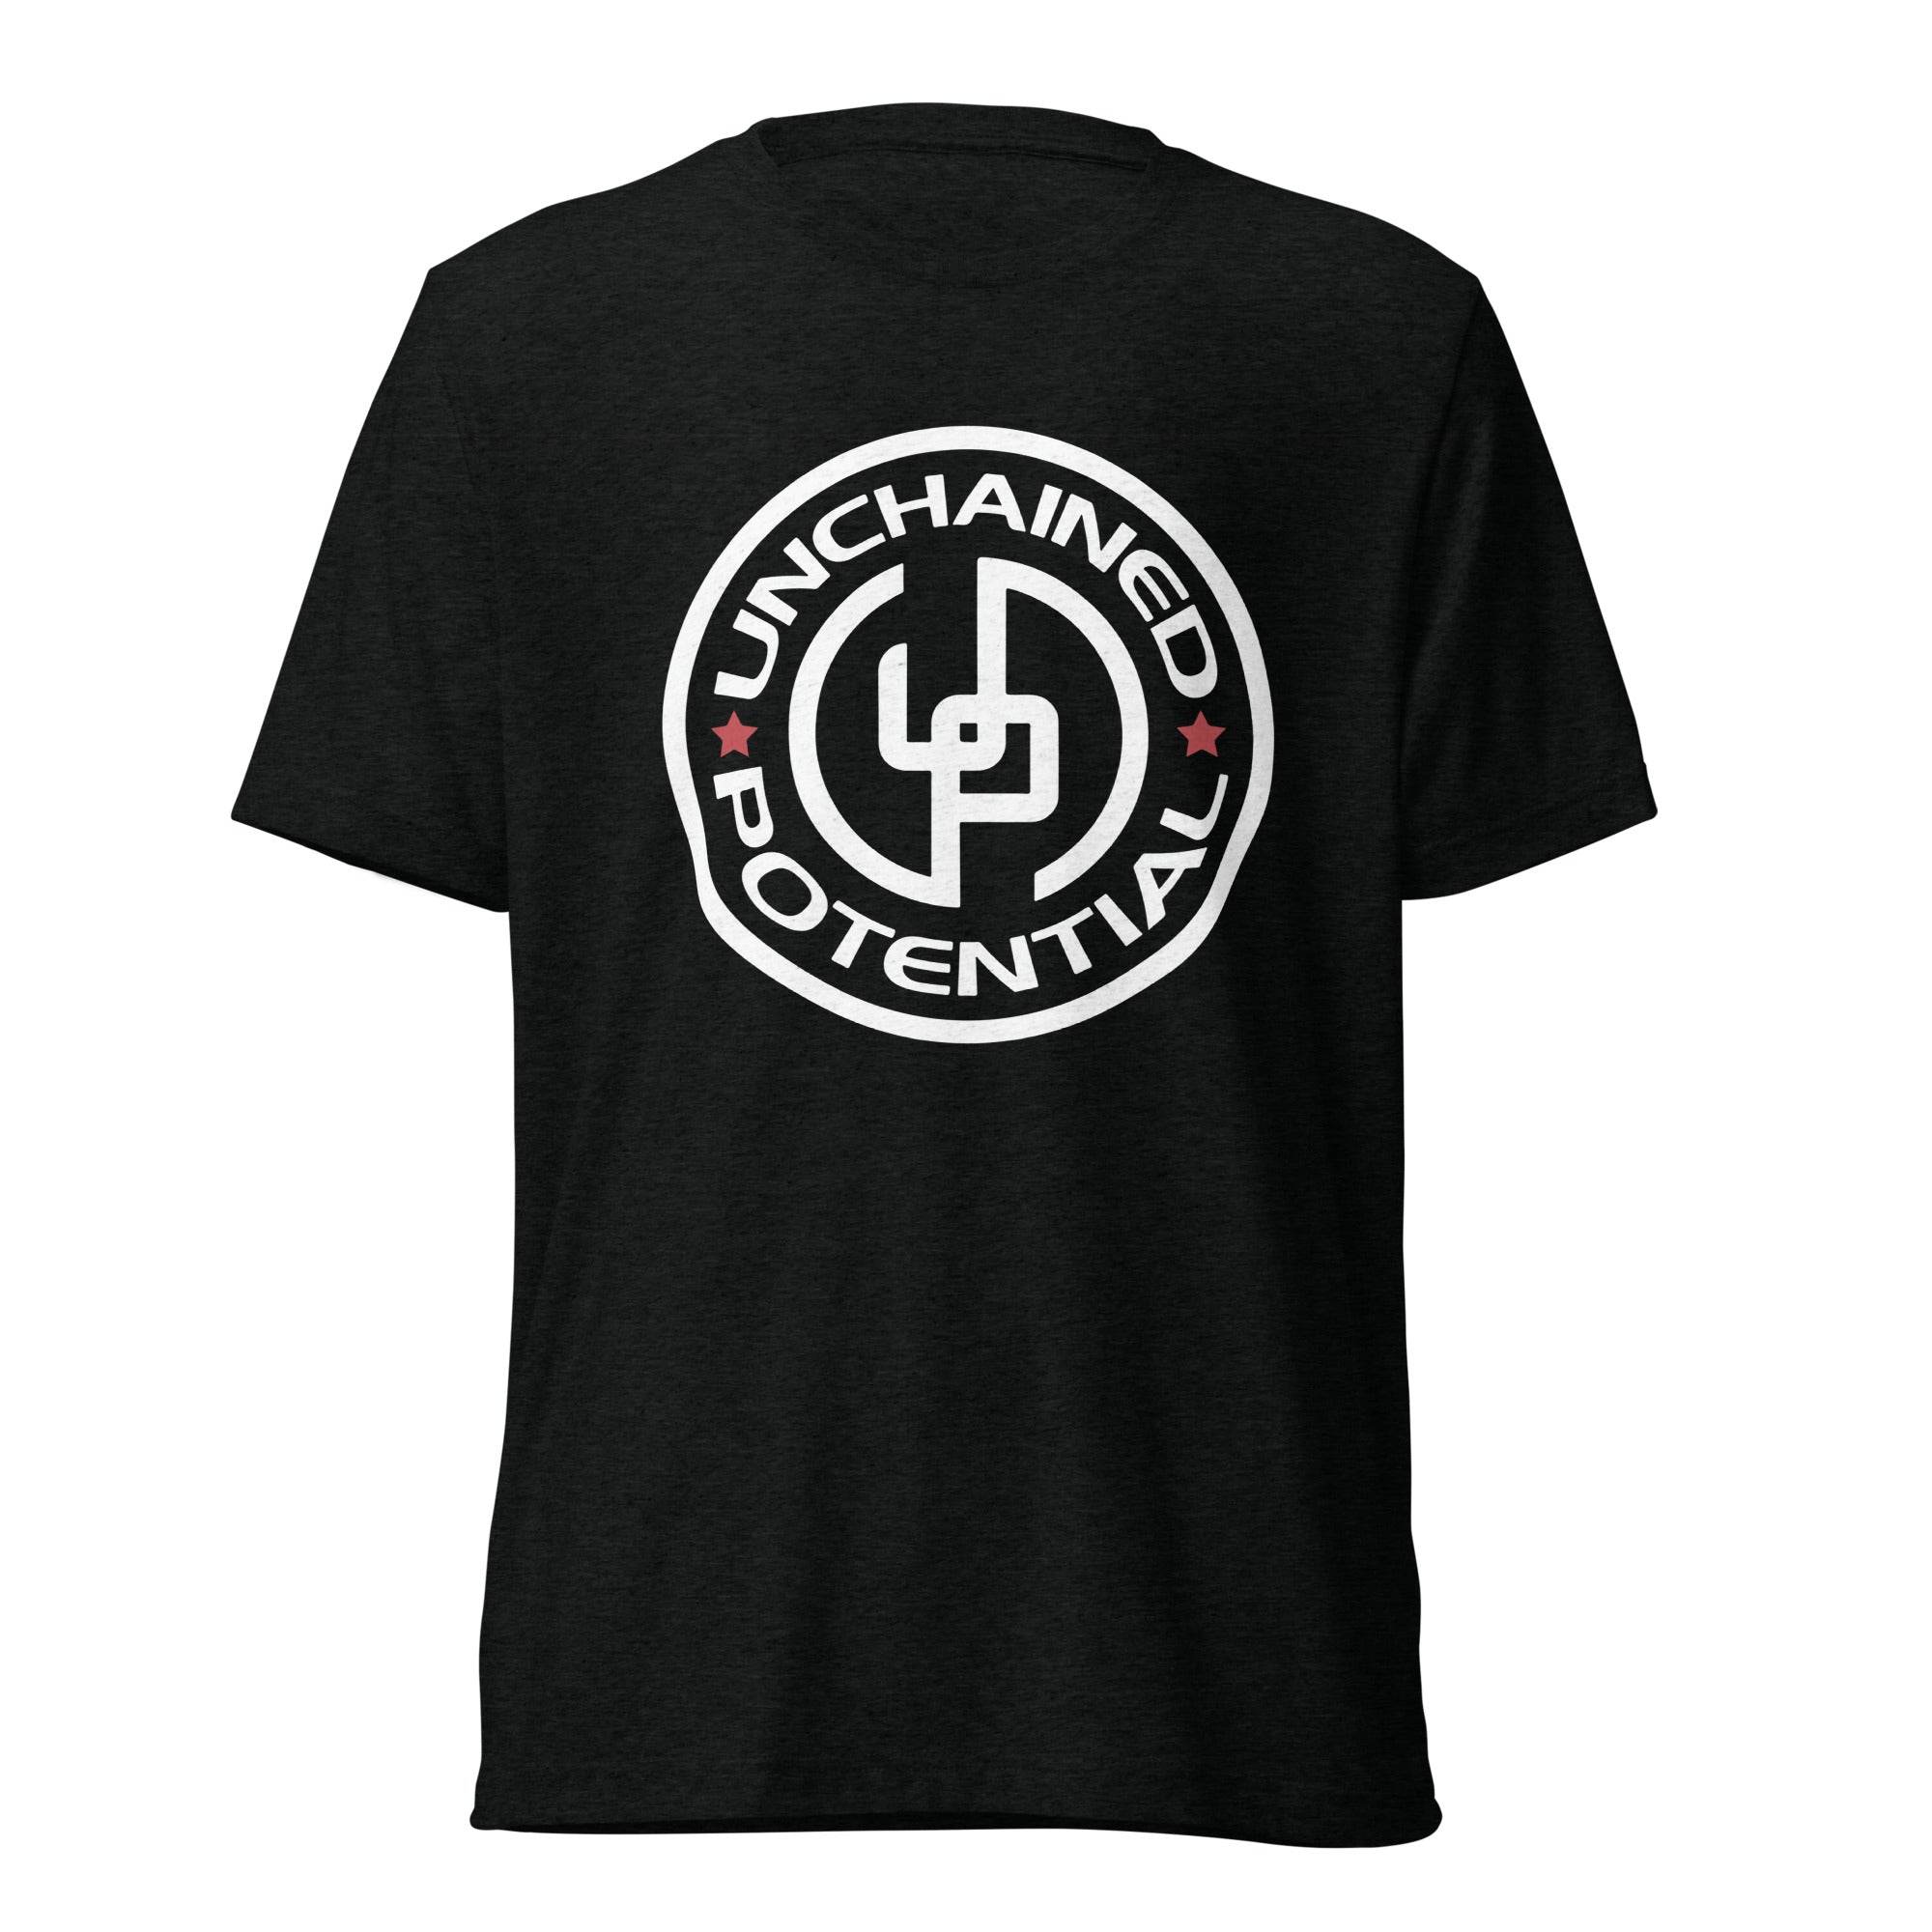 Unchained Potential Short sleeve t-shirt